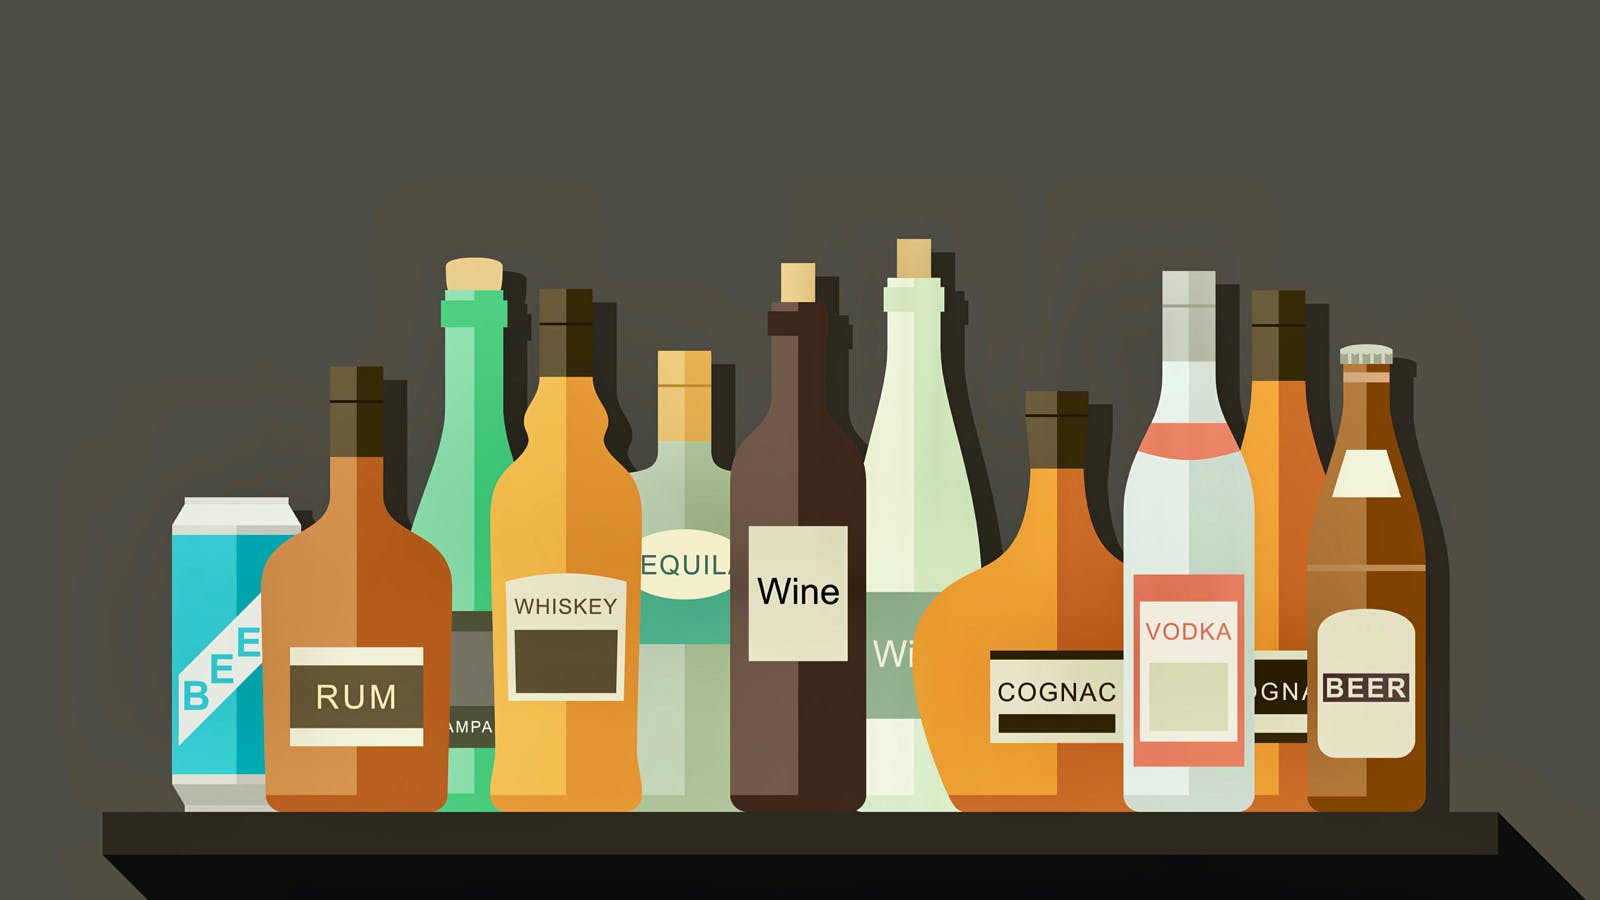 Once You Open Your Liquor - How Long Does It Last And What Is Its Shelf Life?